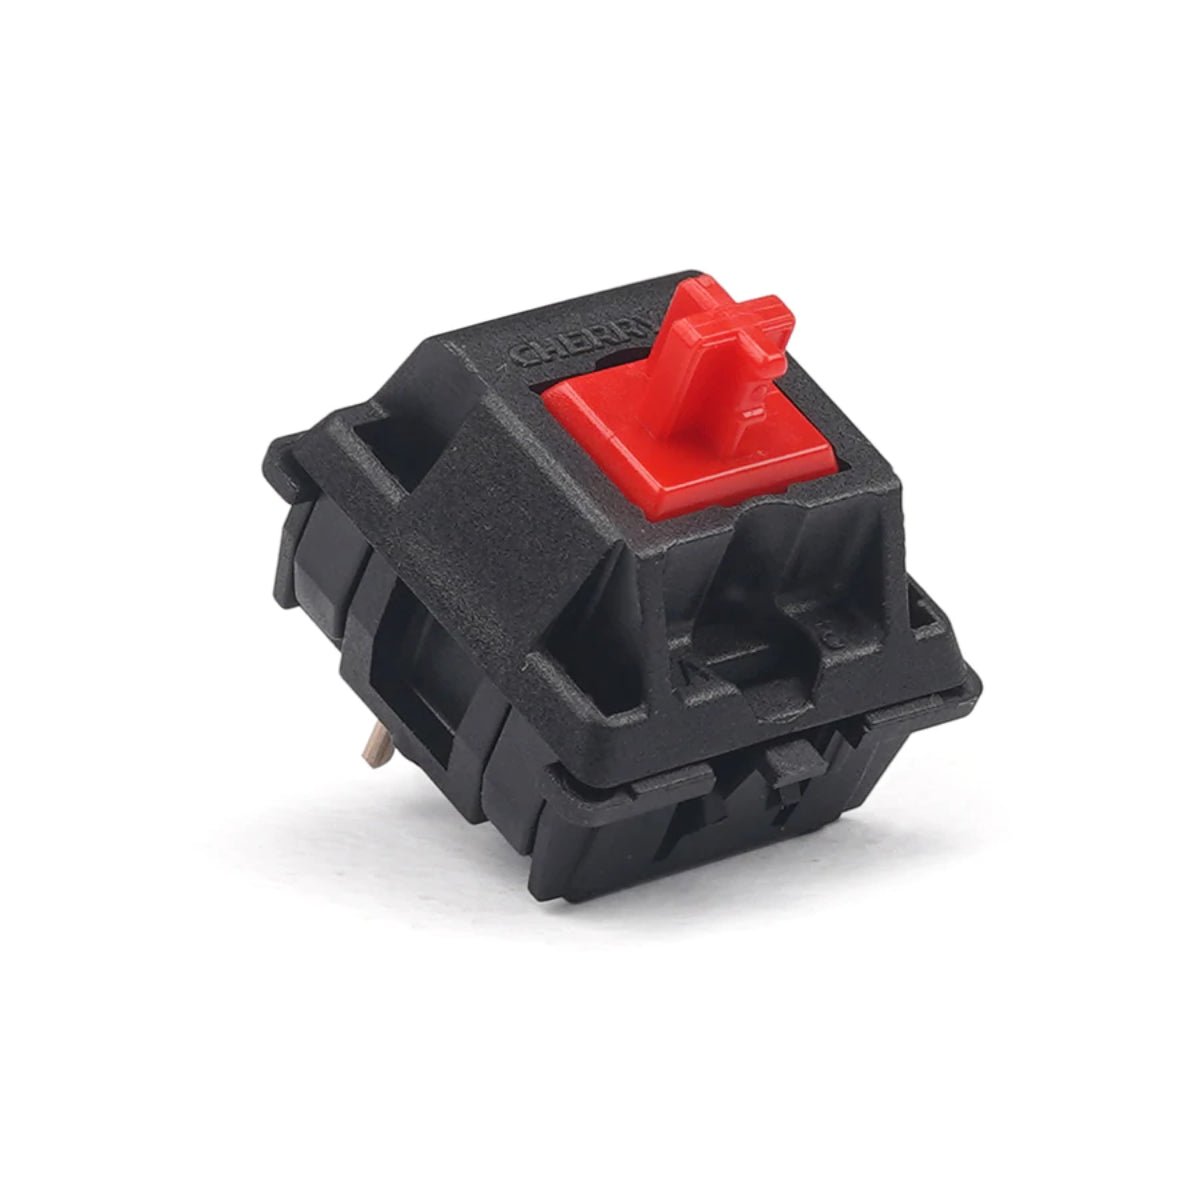 KBD Fans Cherry MX Hyperglide Switches - Red - Store 974 | ستور ٩٧٤